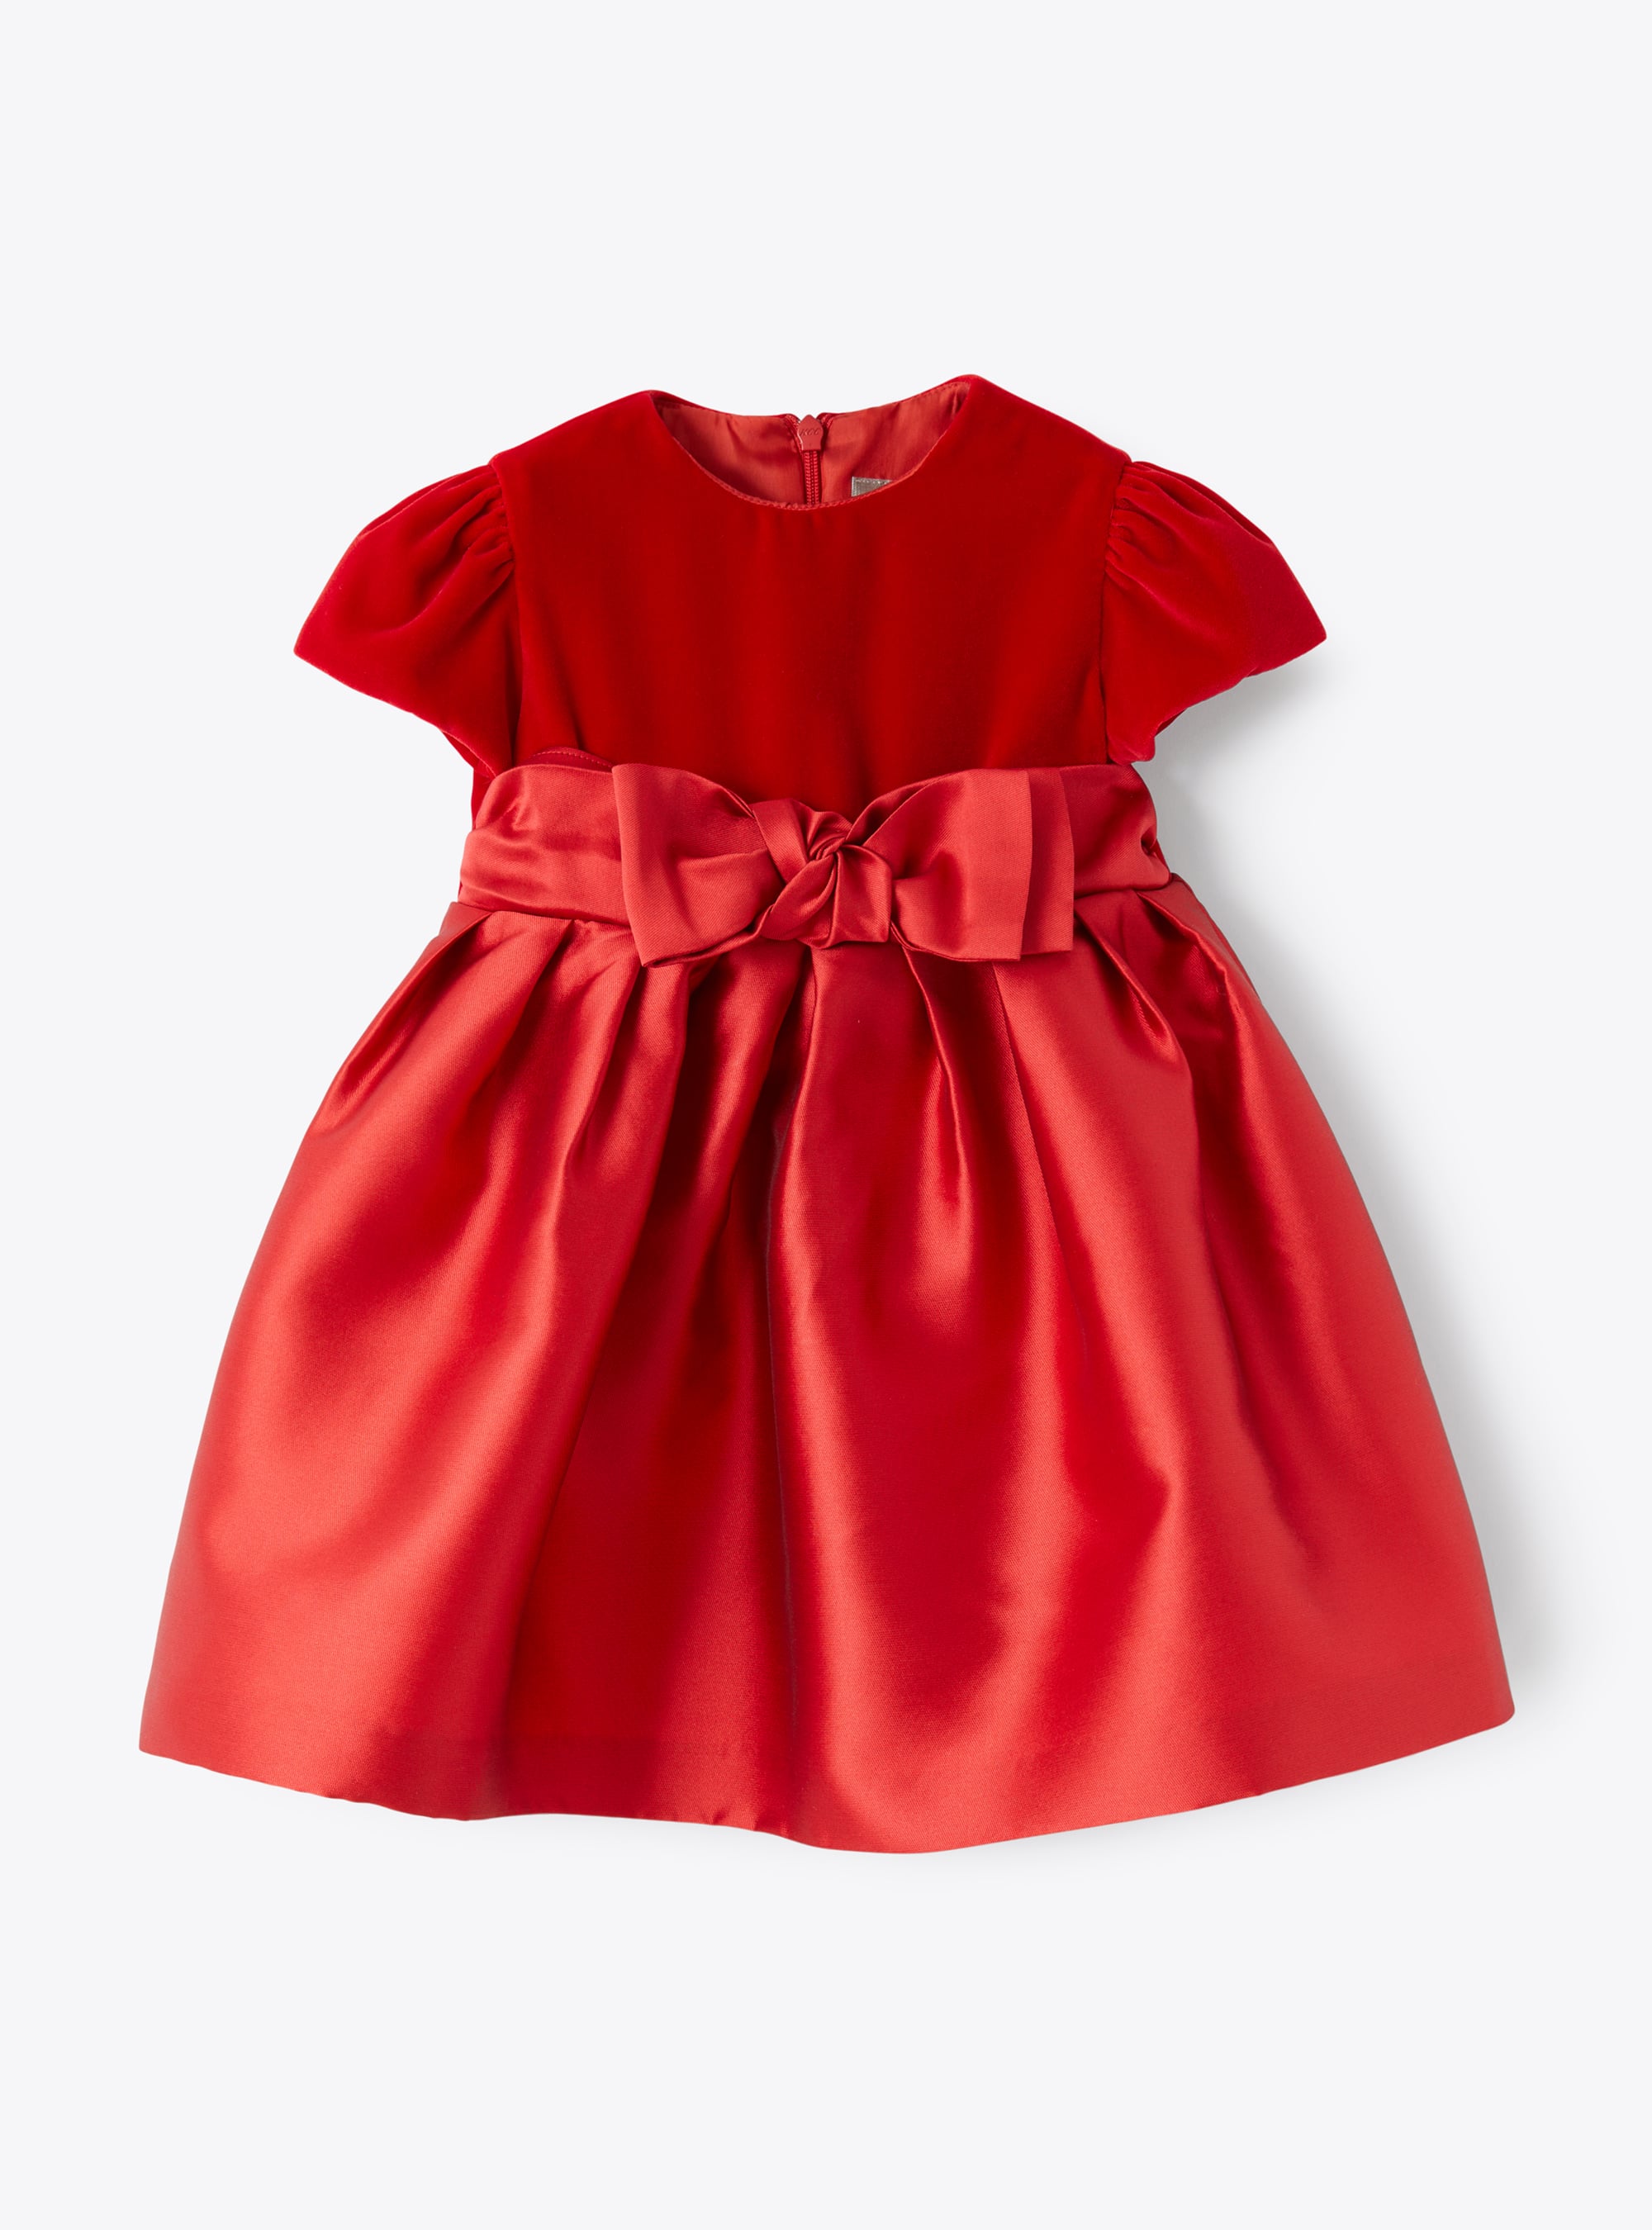 Dress in poppy red with bow embellishment | Il Gufo